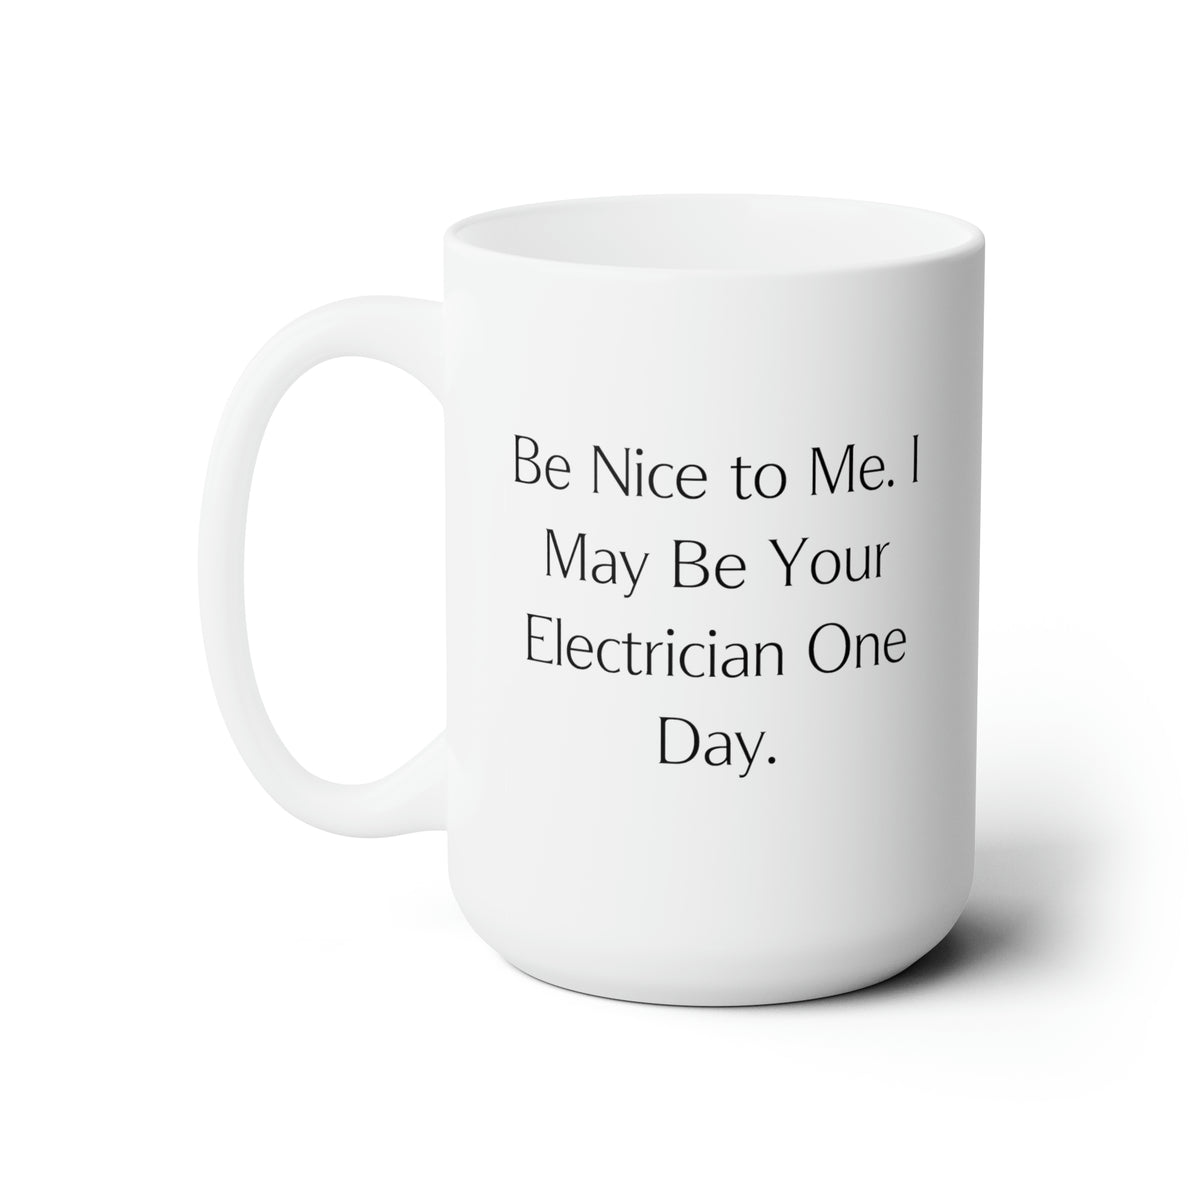 Funny Electrician Gifts, Be Nice to Me. I May Be Your, Electrician 11oz 15oz Mug From Colleagues, Gifts For Colleagues, Unique electrician gifts, Best electrician gifts, Personalized electrician